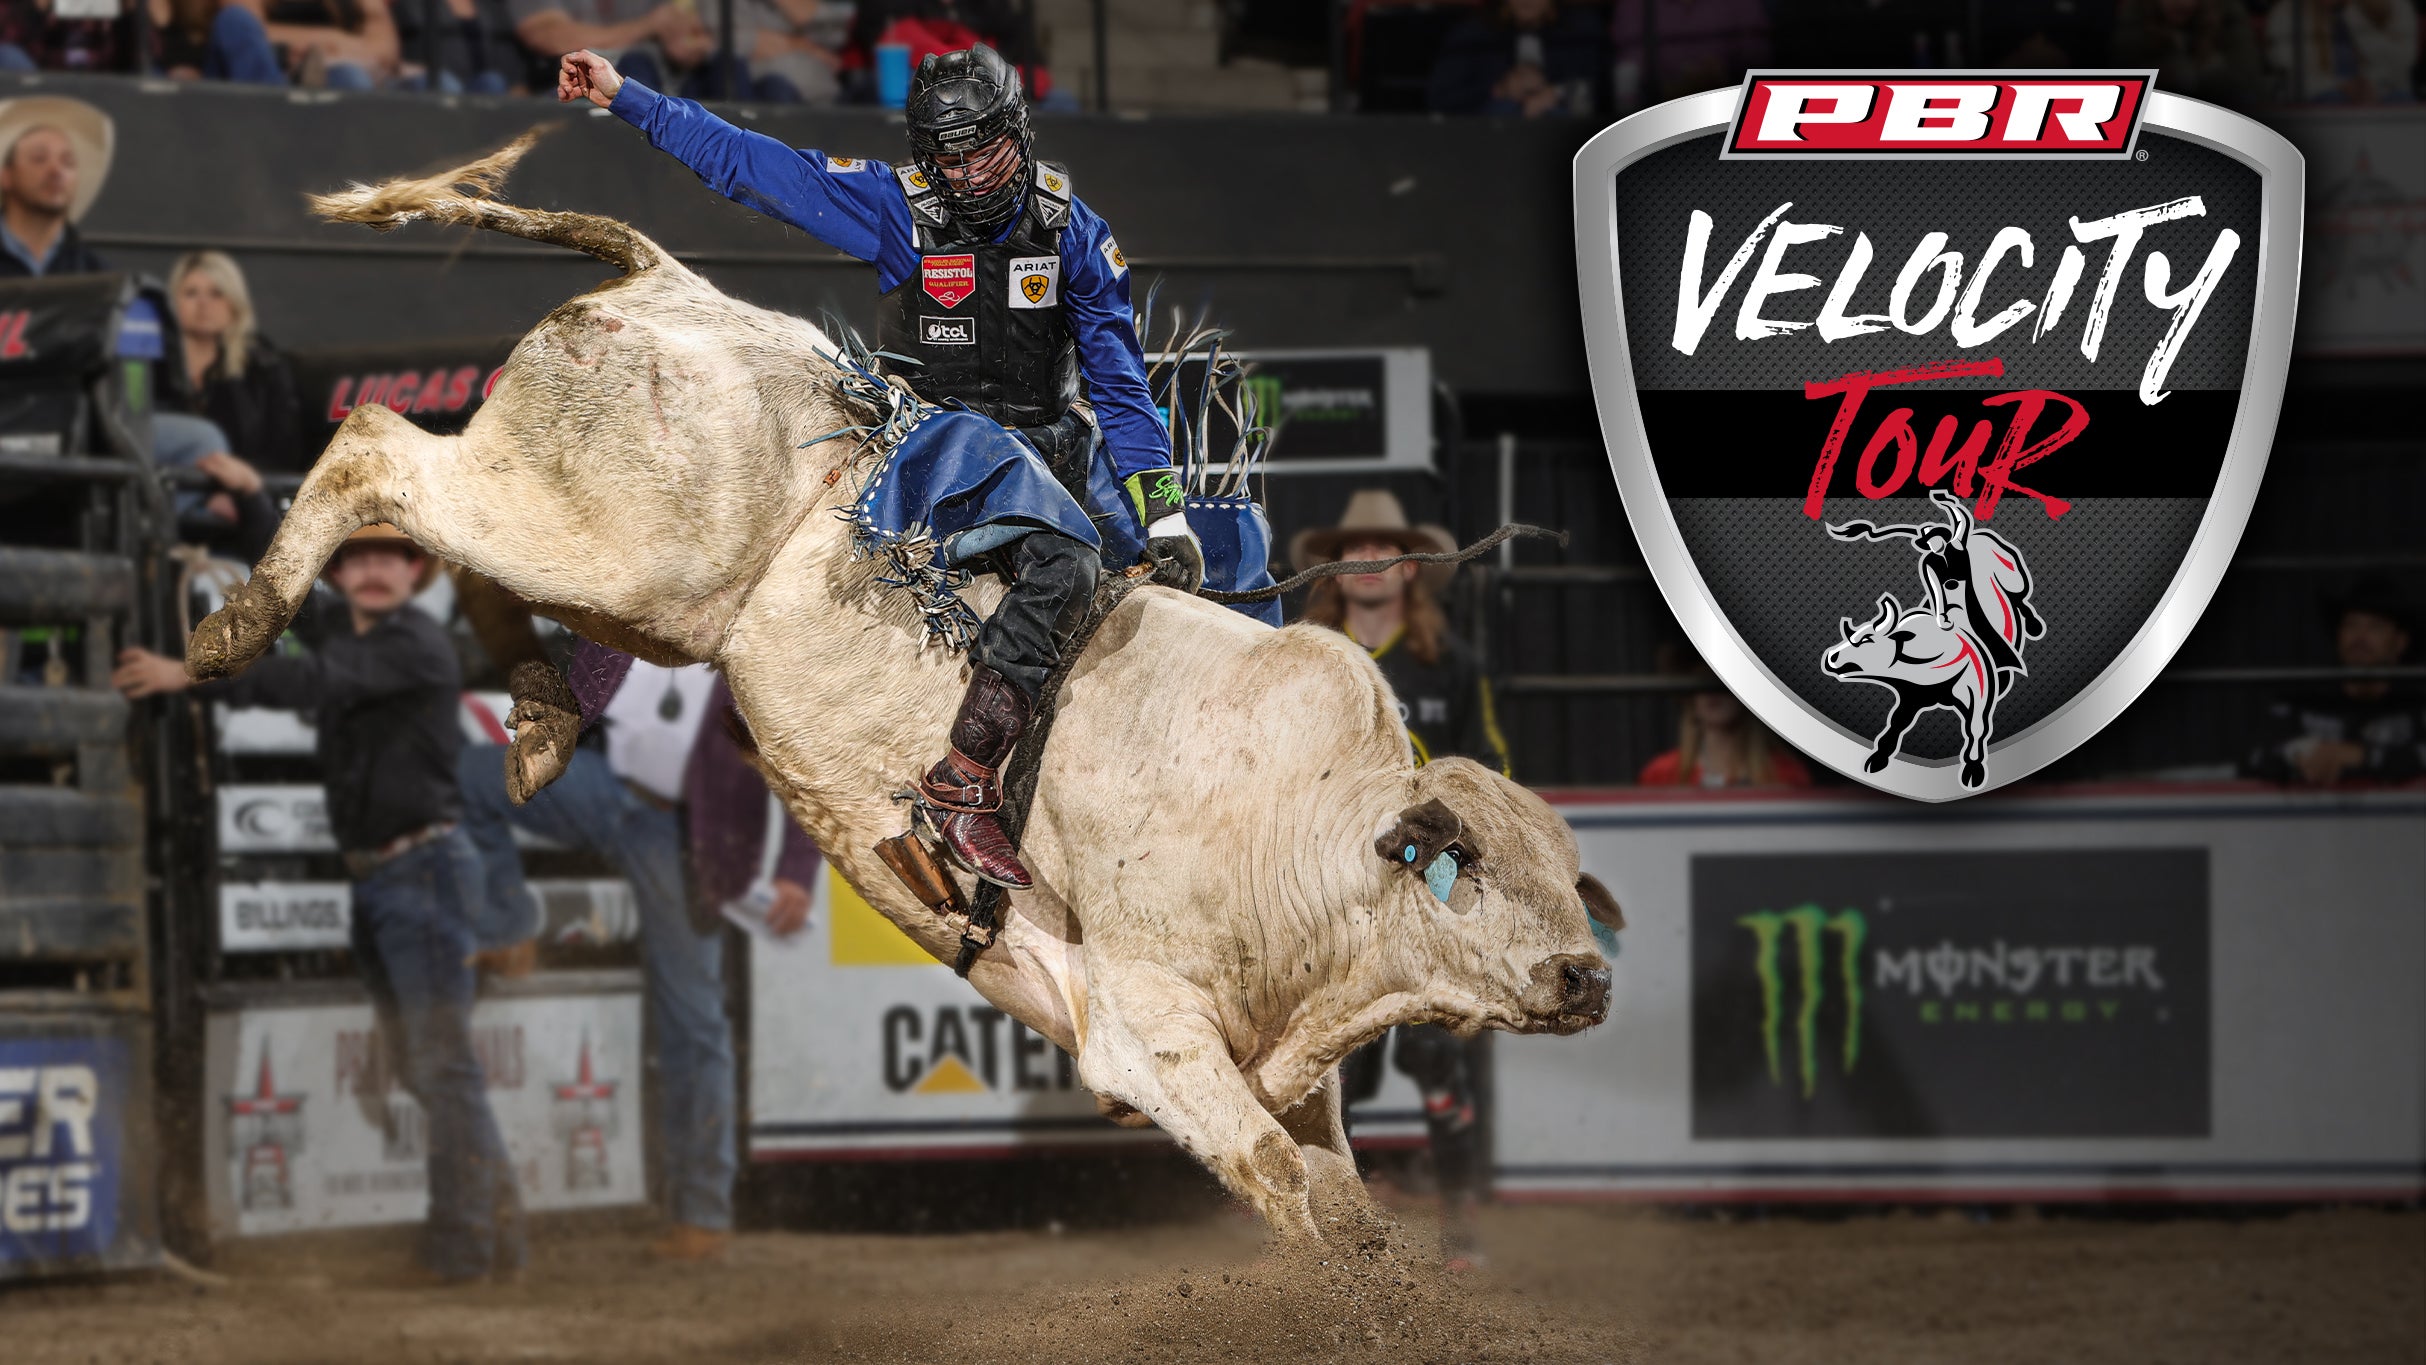 PBR: Velocity Tour free presale passcode for early tickets in Corpus Christi